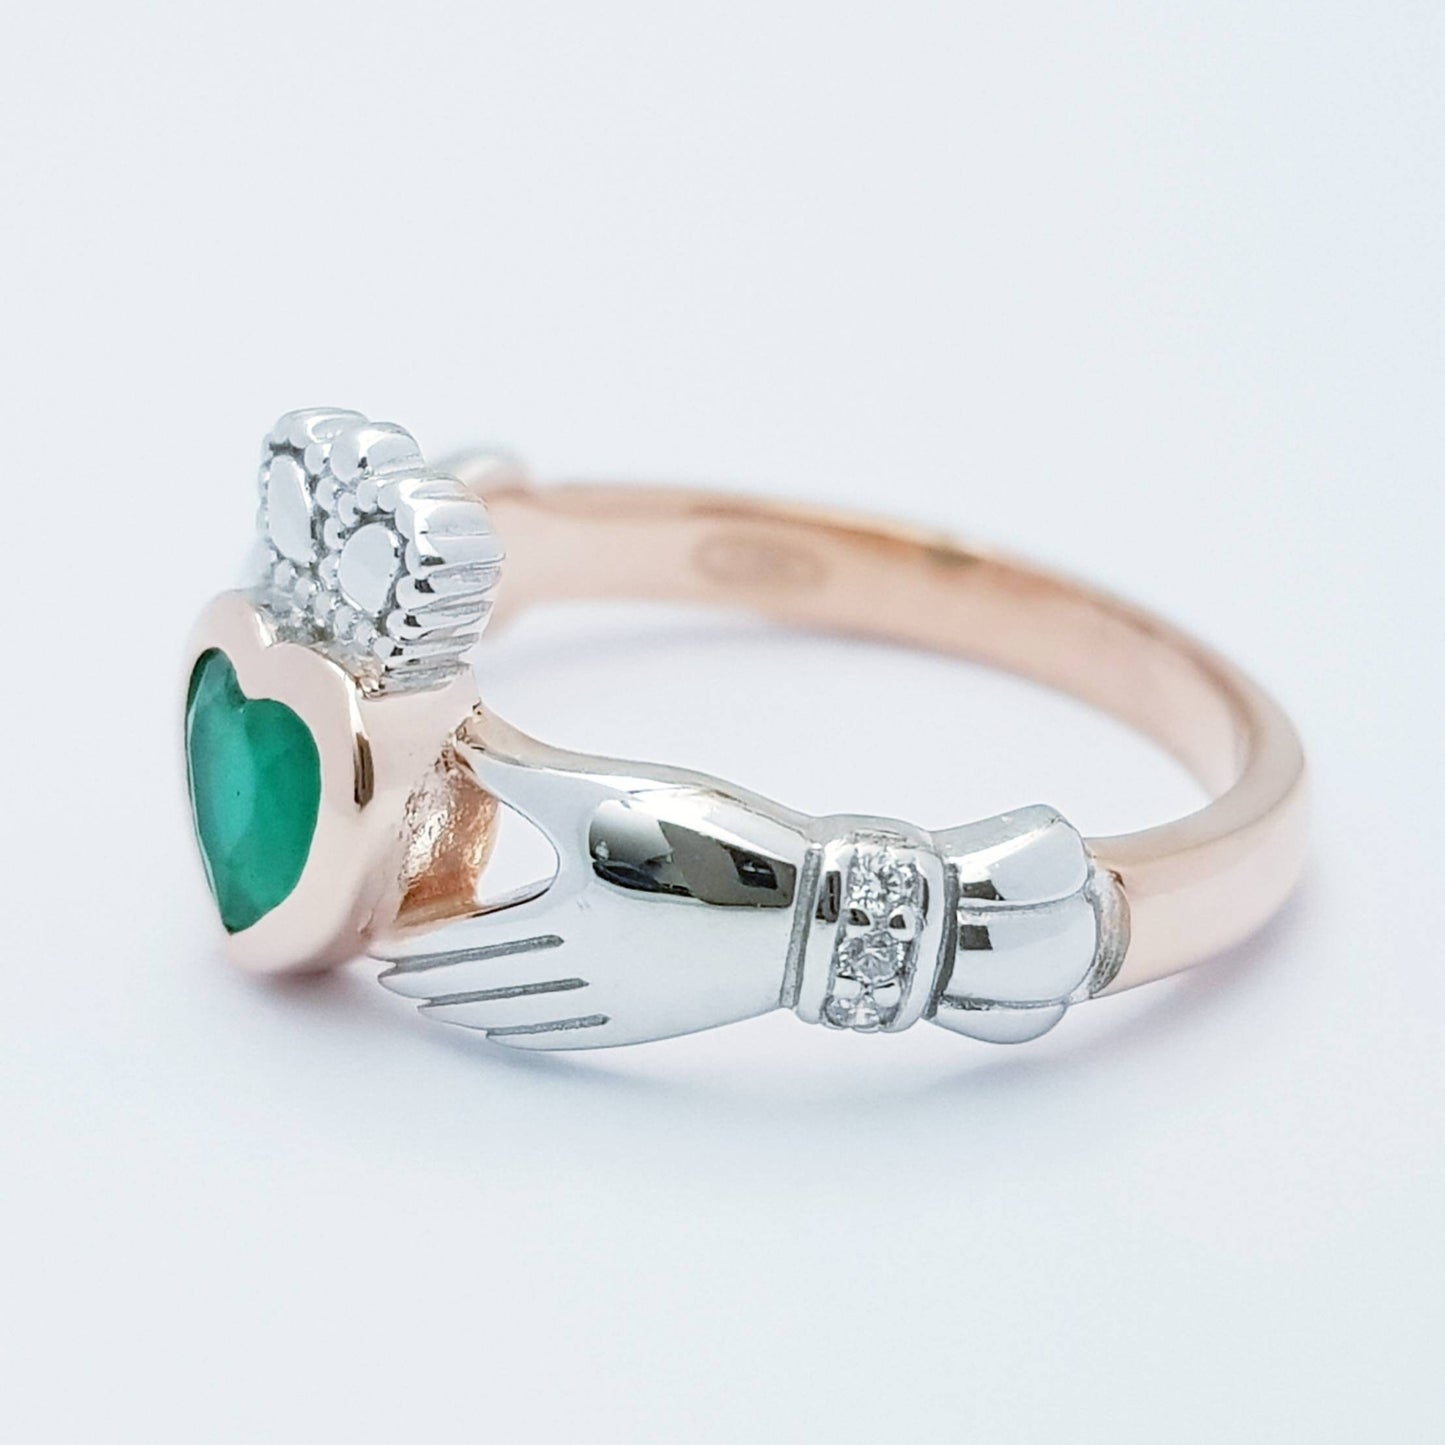 Sterling Silver Rose Gold plated Claddagh ring set with emerald green stone, heart and hands ring